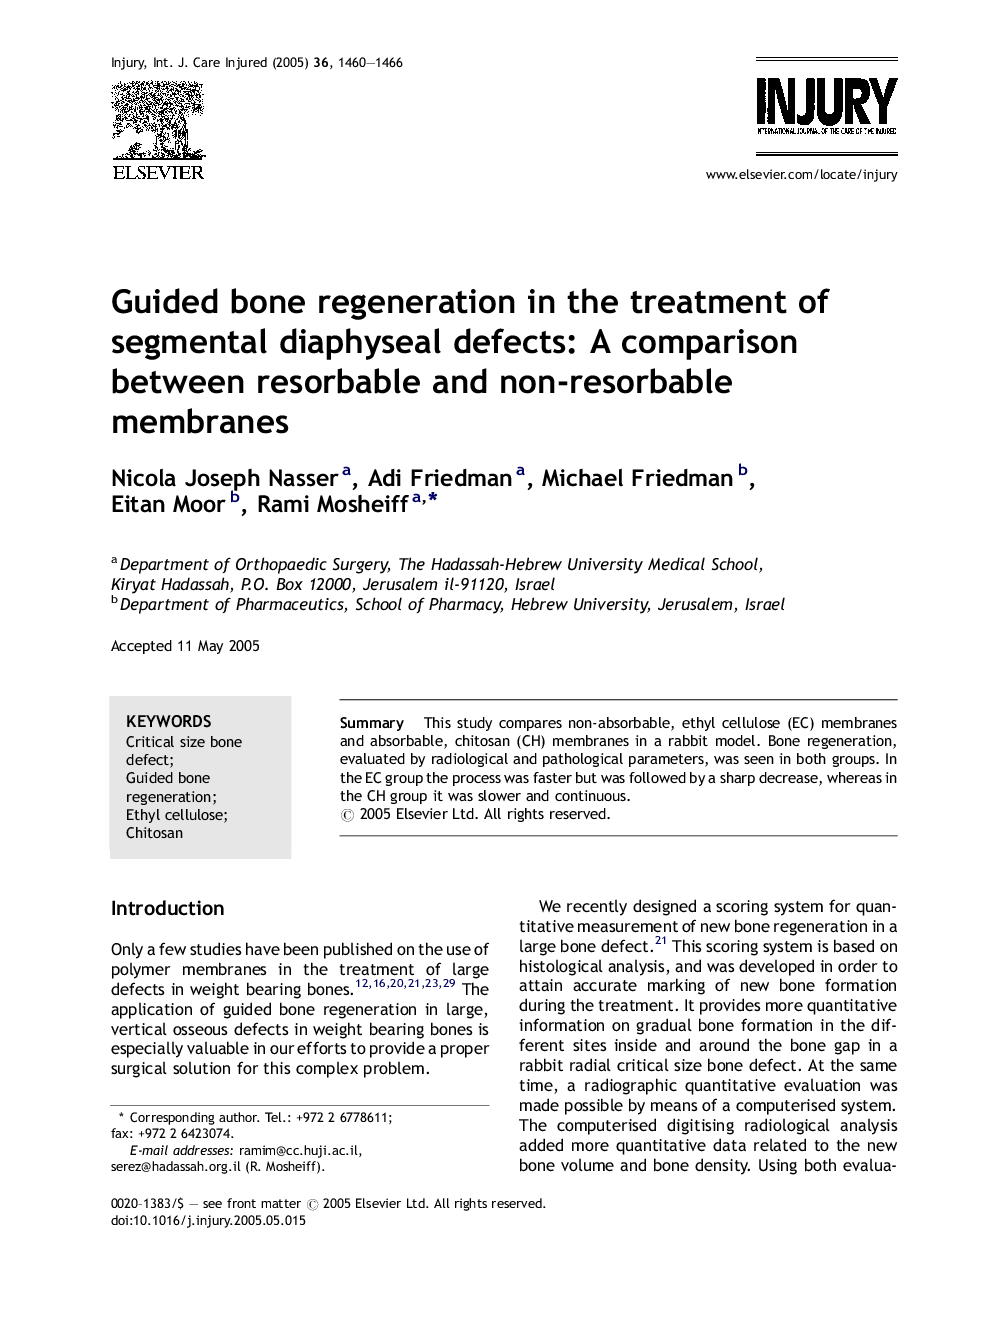 Guided bone regeneration in the treatment of segmental diaphyseal defects: A comparison between resorbable and non-resorbable membranes